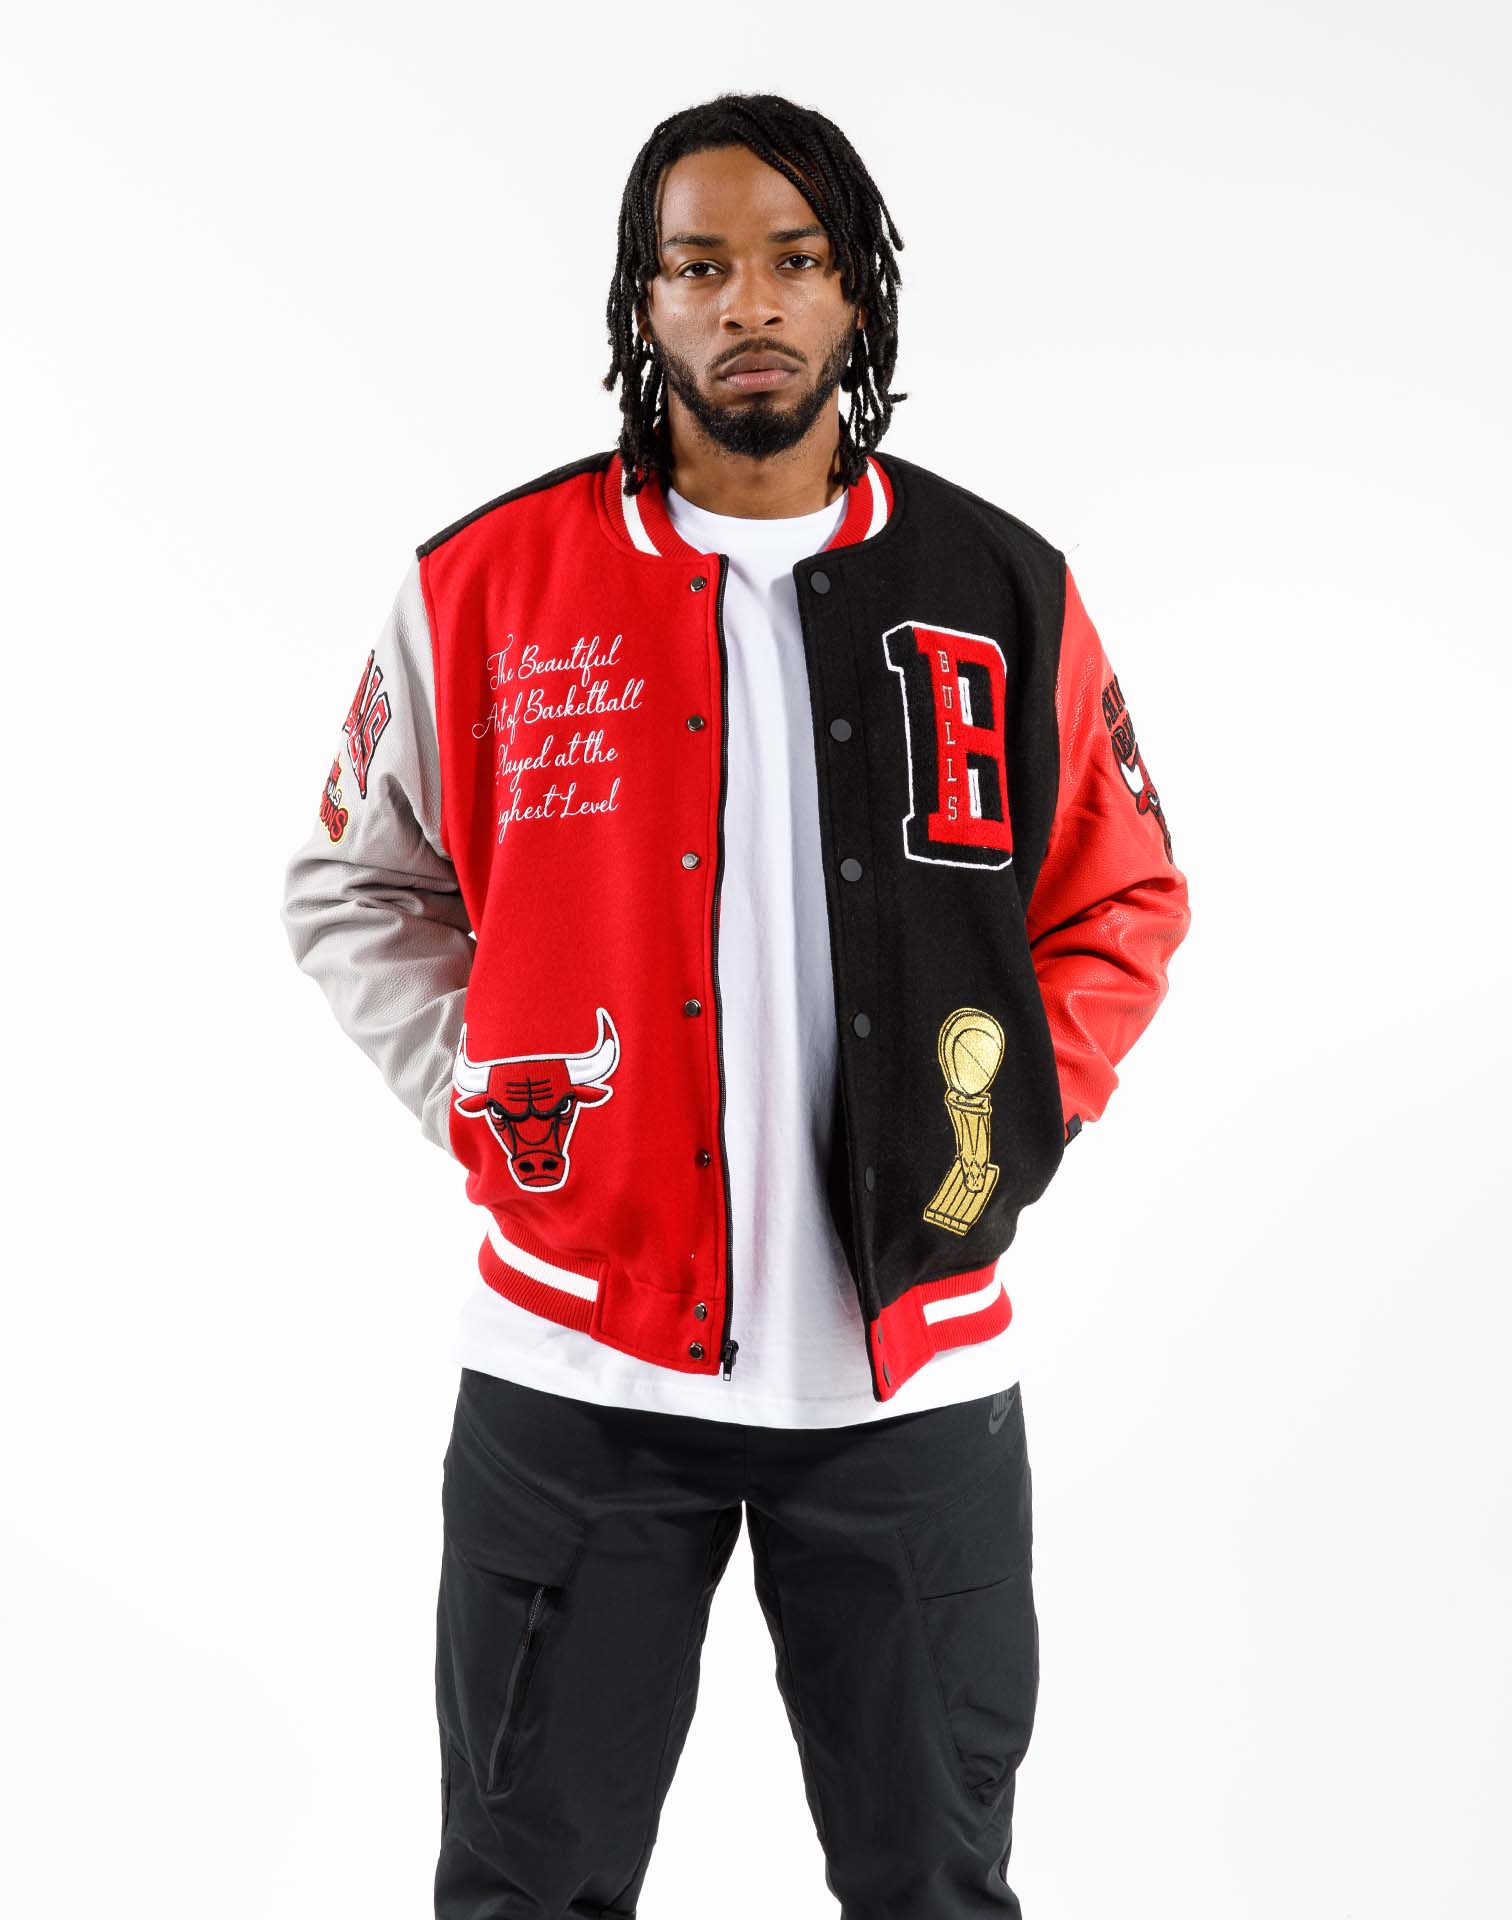 Official Chicago Bulls Jackets, Track Jackets, Pullovers, Coats